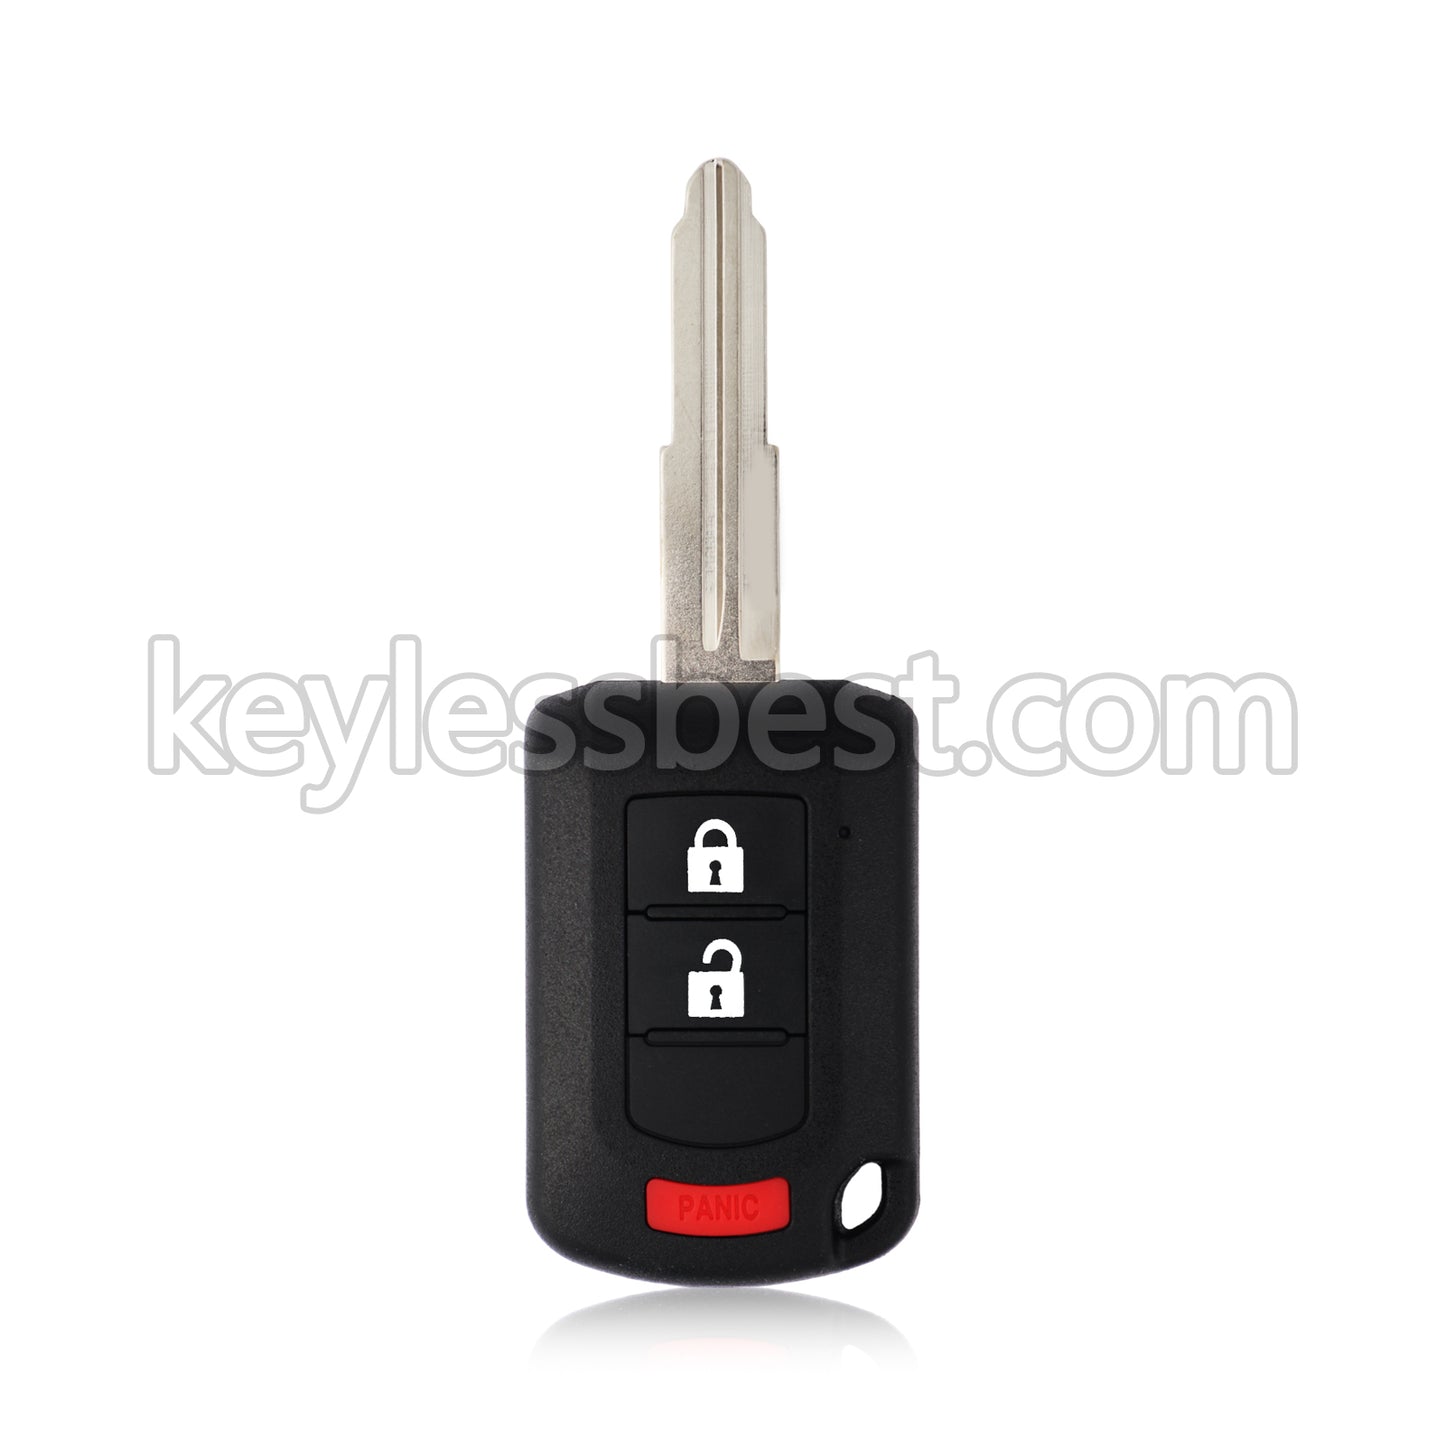 2018 - 2020 Mitsubishi Eclipse Cross / 3 Buttons Remote Key / OUCJ166N / 315MHz